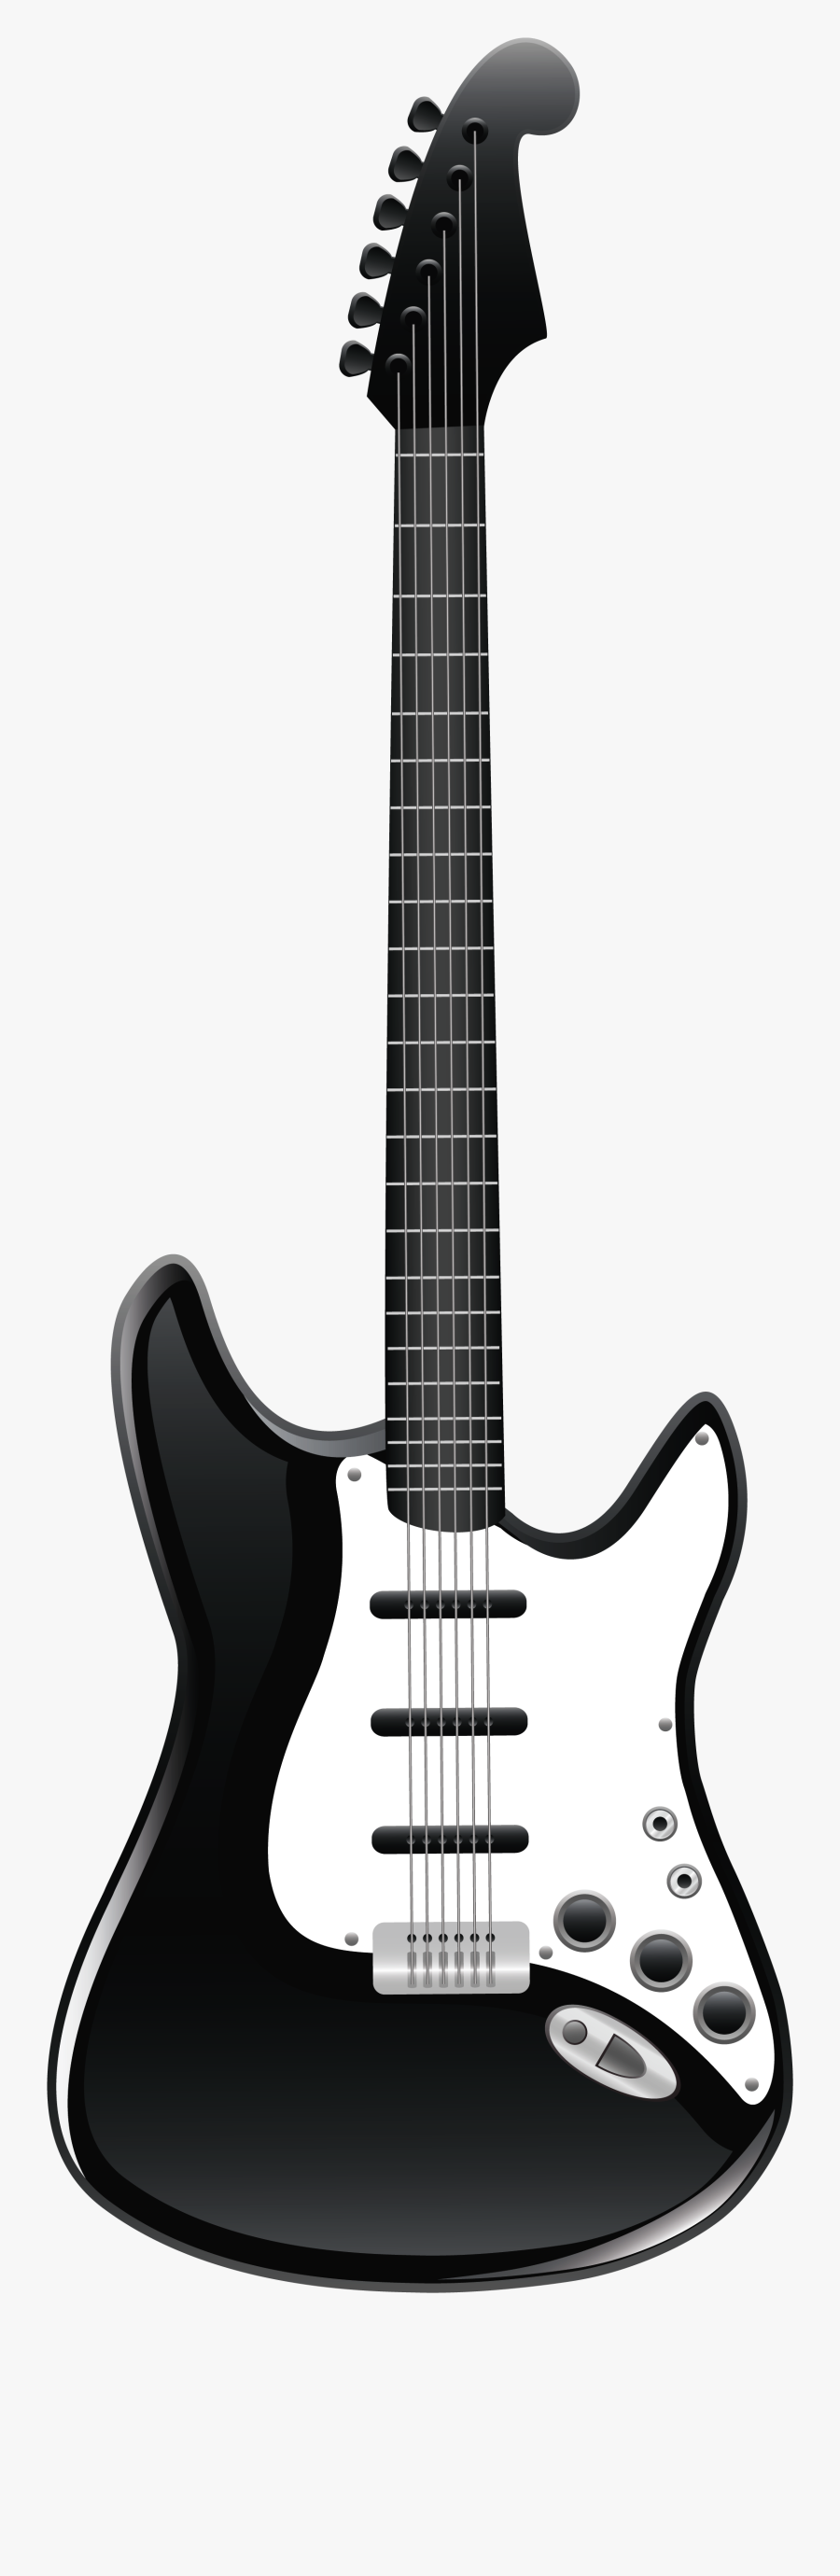 Black And White Guitar Clipart Best - Png Guitar, Transparent Clipart